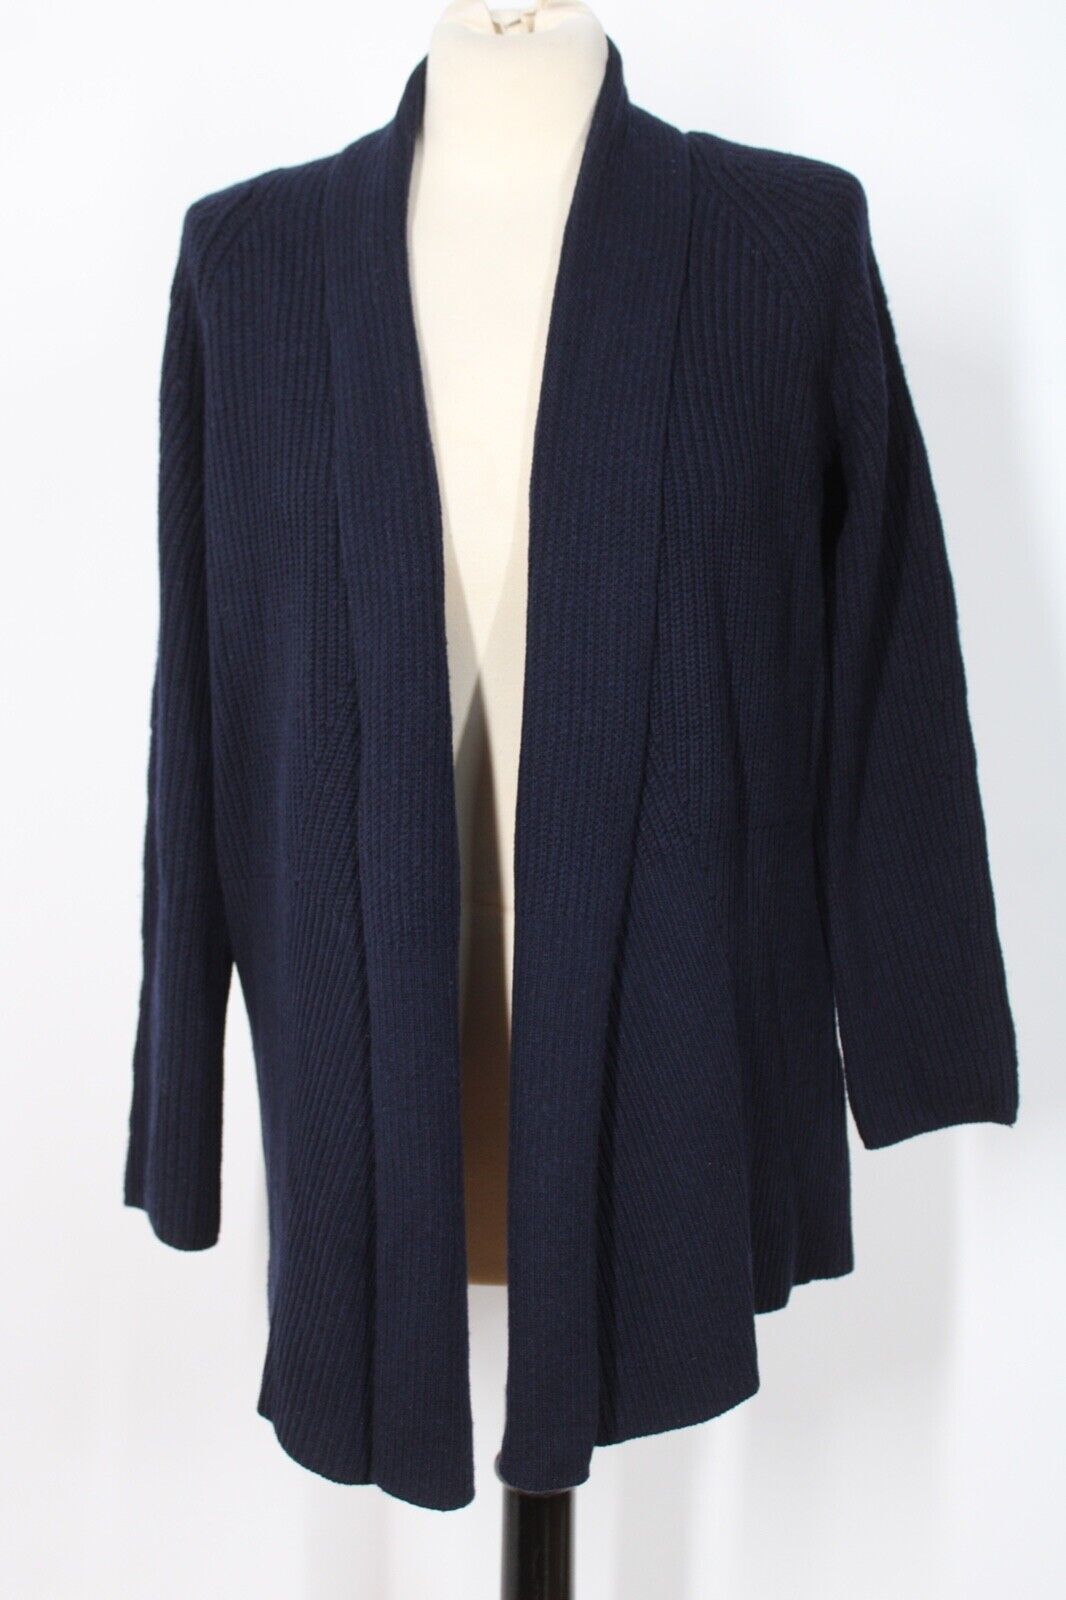 Primary image for Vince S Blue Wool Cashmere Rib-Knit Open-Front Cardigan Sweater